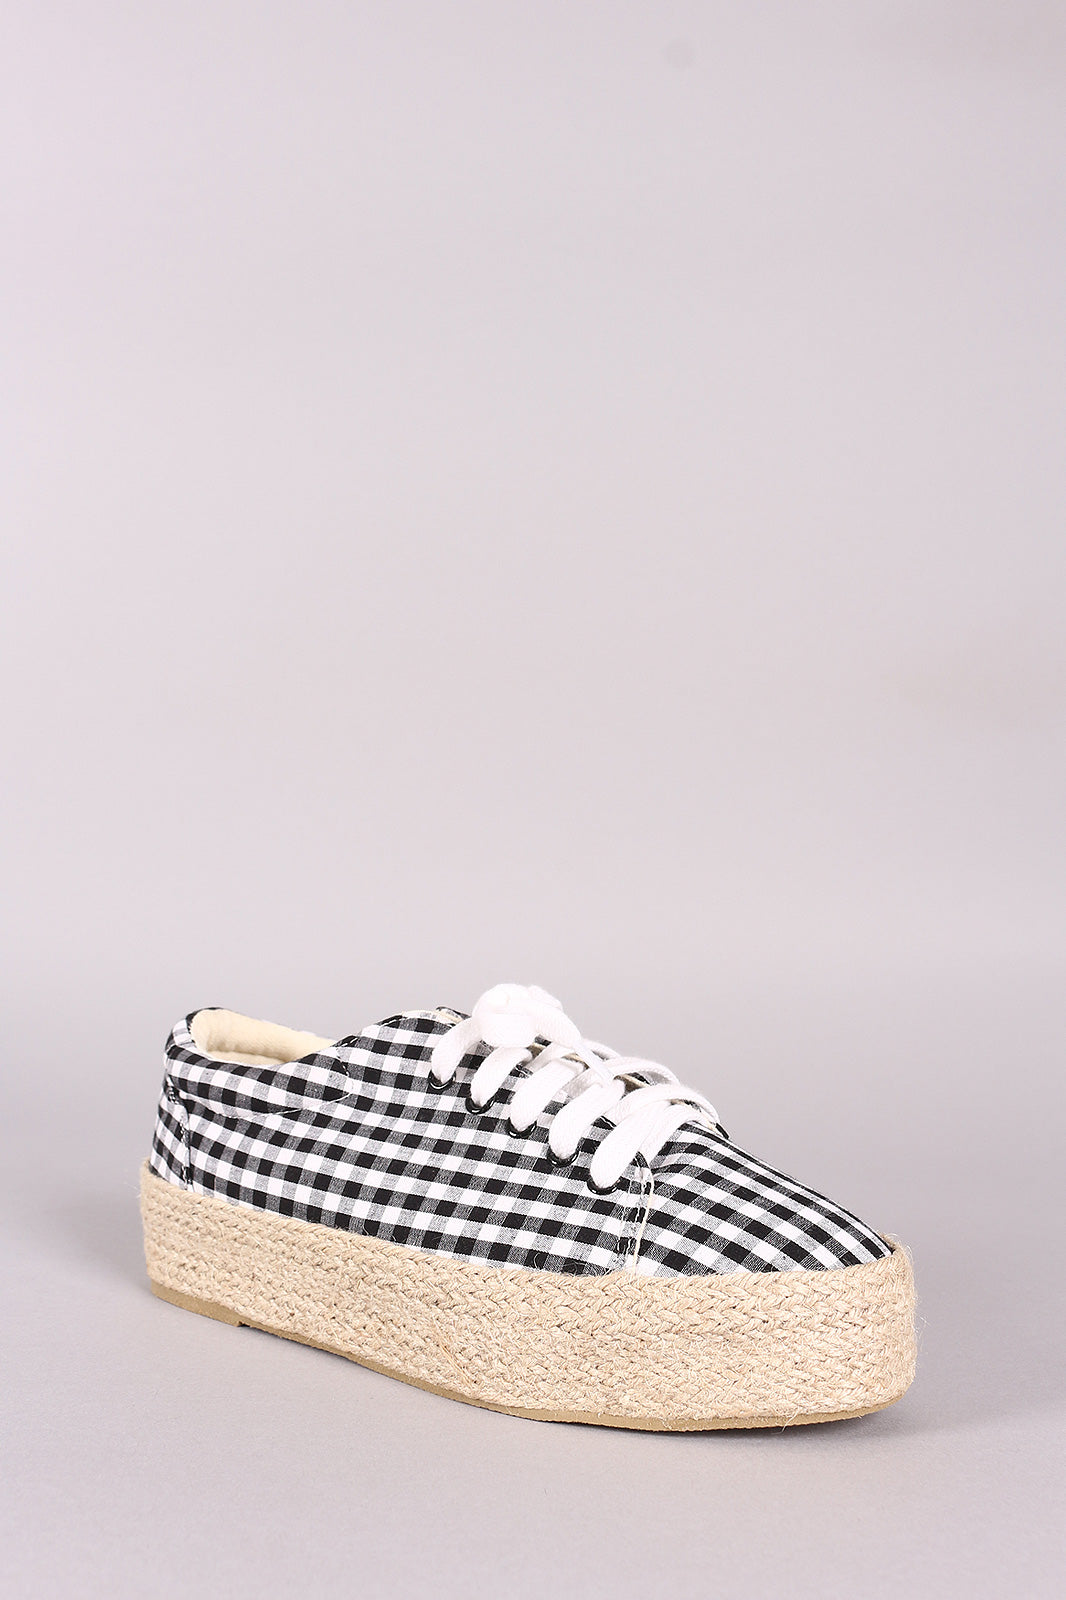 Qupid Printed Lace Up Espadrille Flatform Sneakers - LABELSHOES